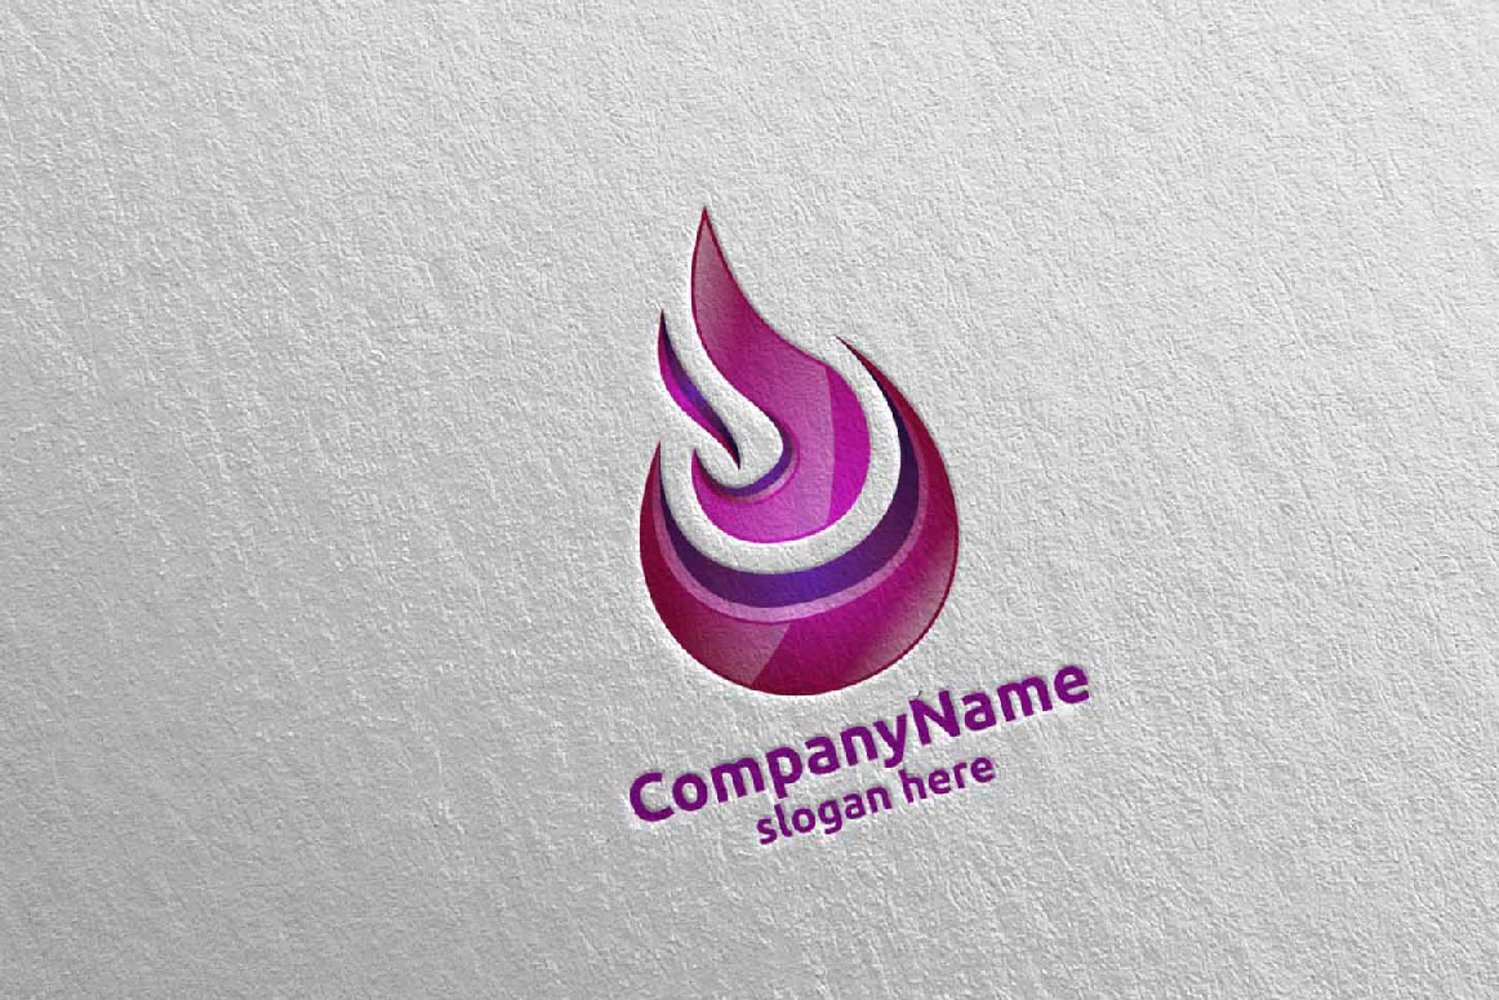 Use this pink logo with fire elements for your projects.